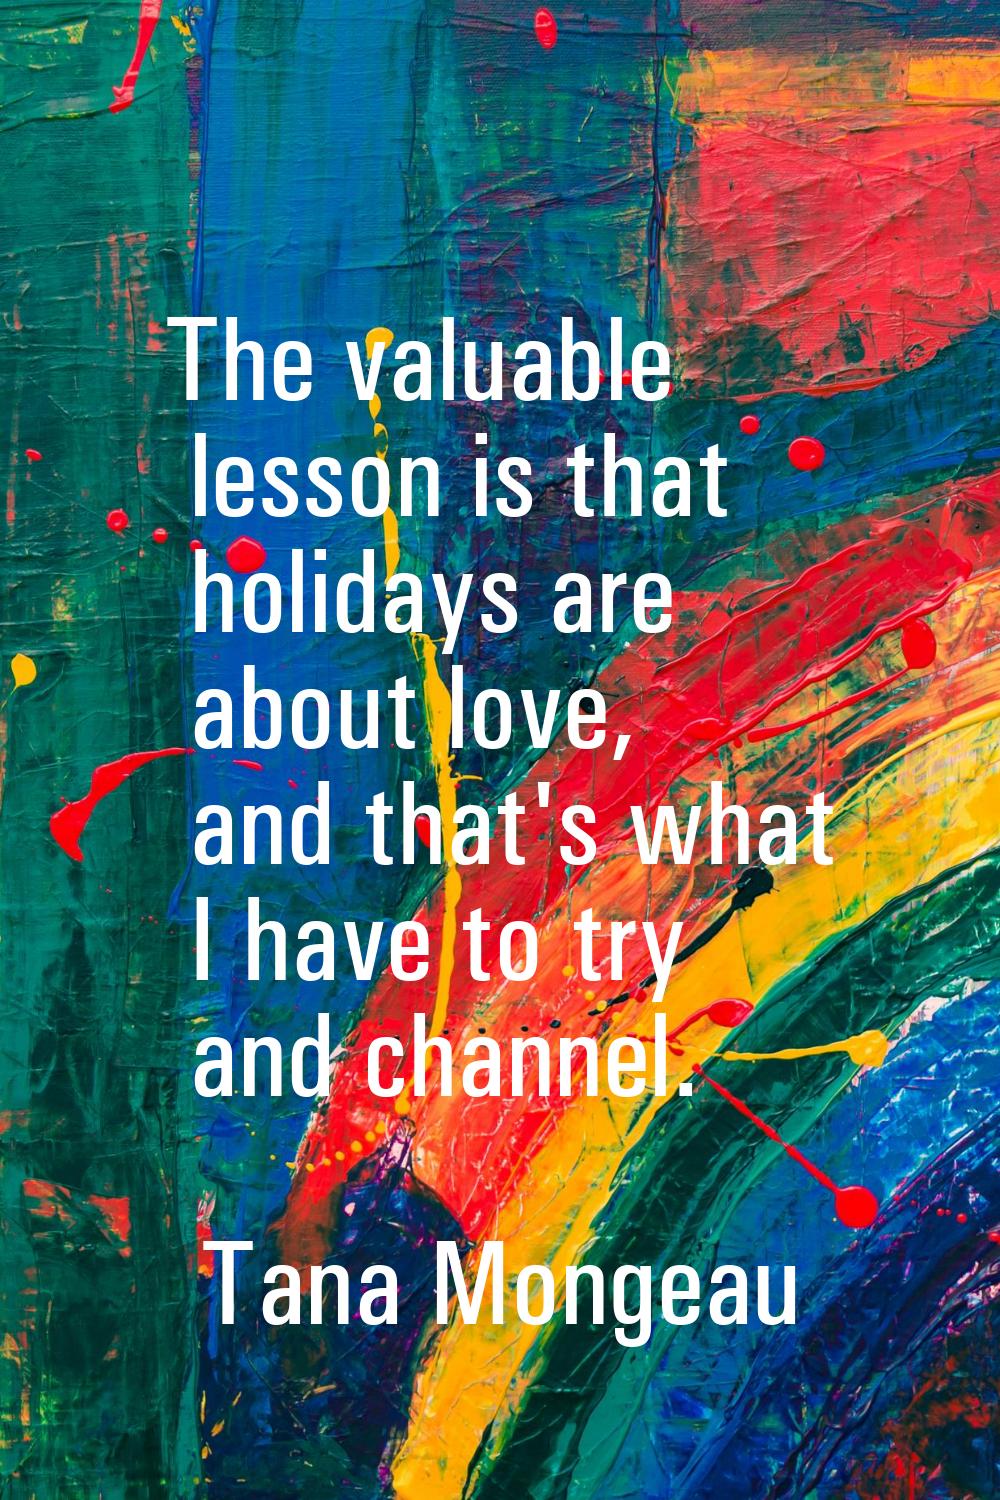 The valuable lesson is that holidays are about love, and that's what I have to try and channel.